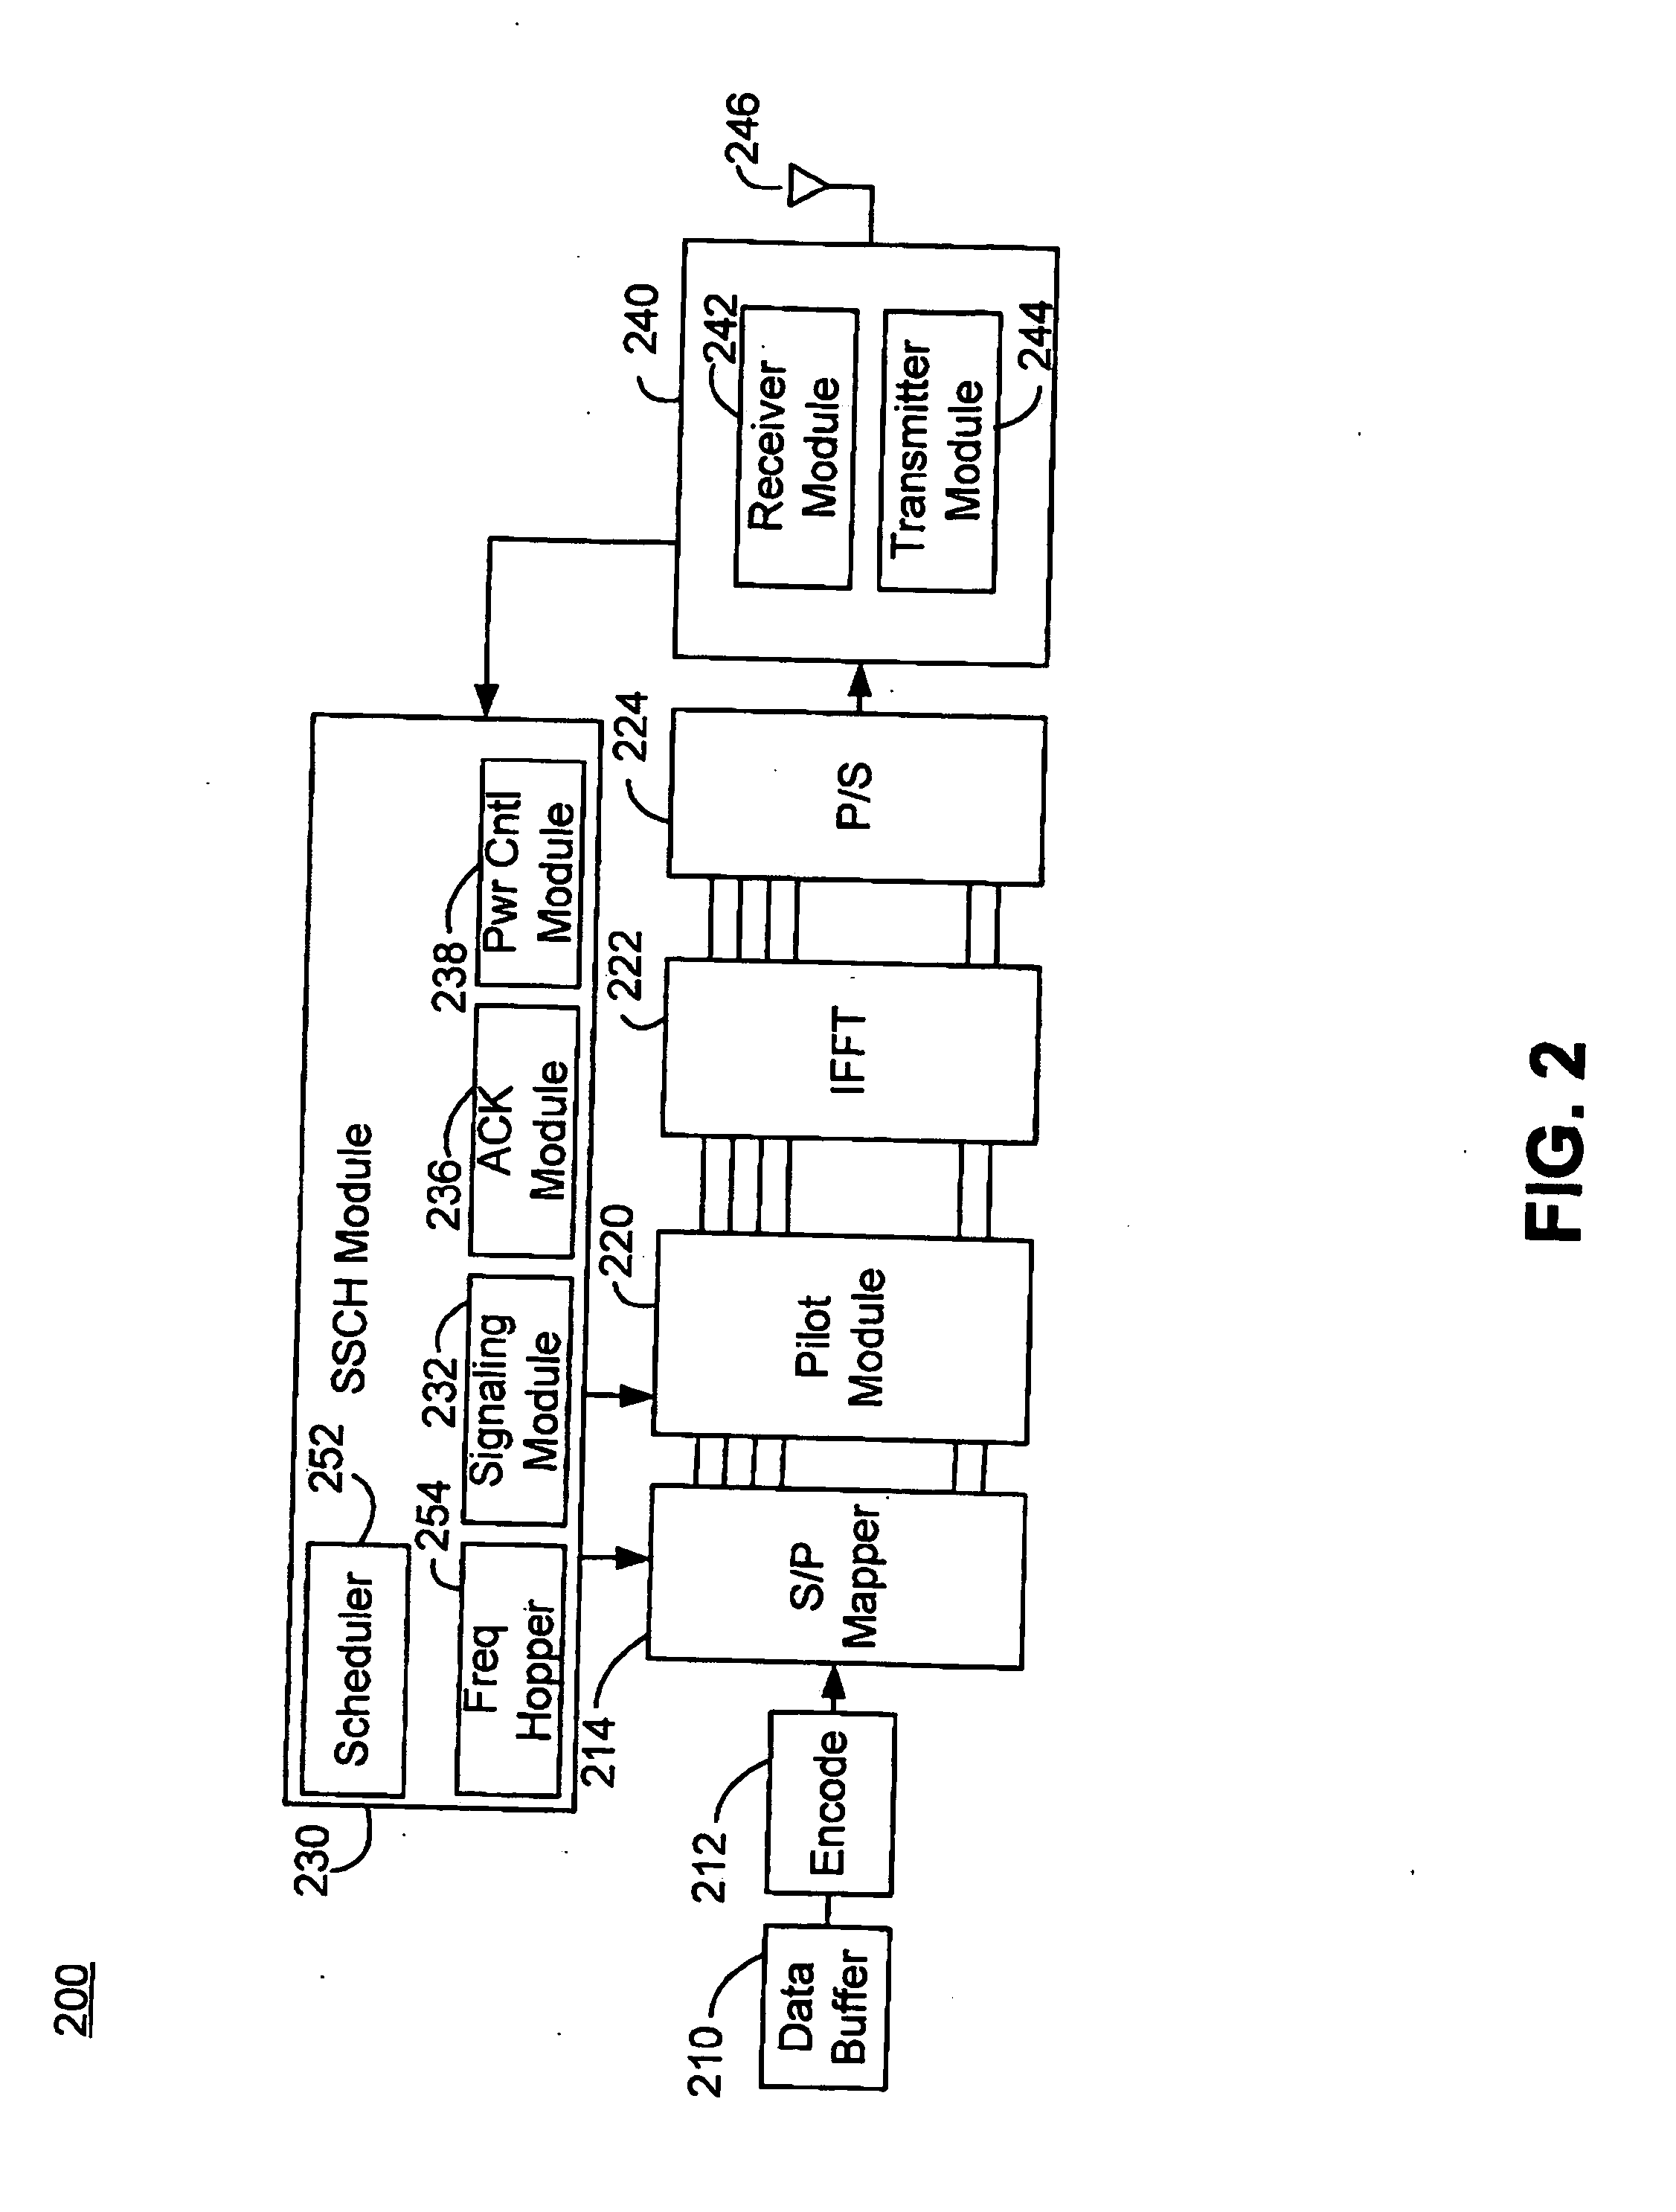 Resource allocation for shared signaling channels